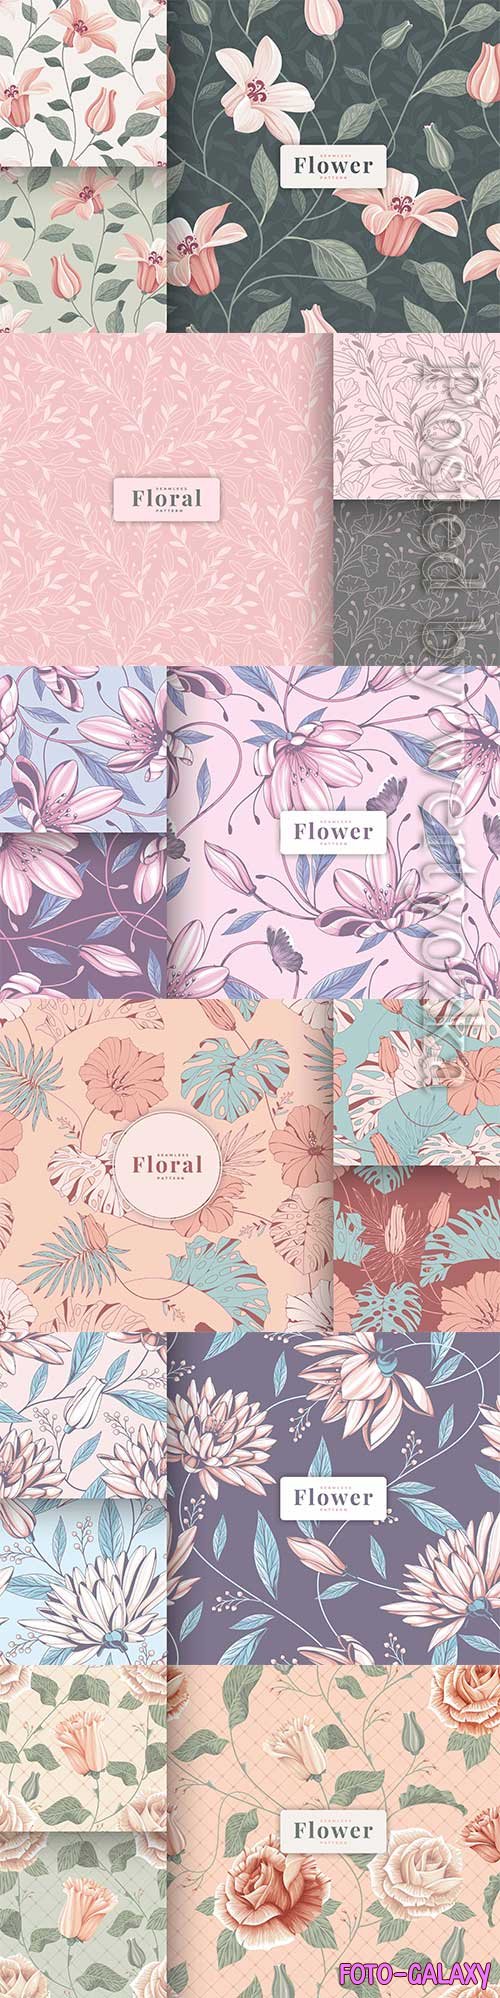 Colour hand drawn vintage floral seamless pattern